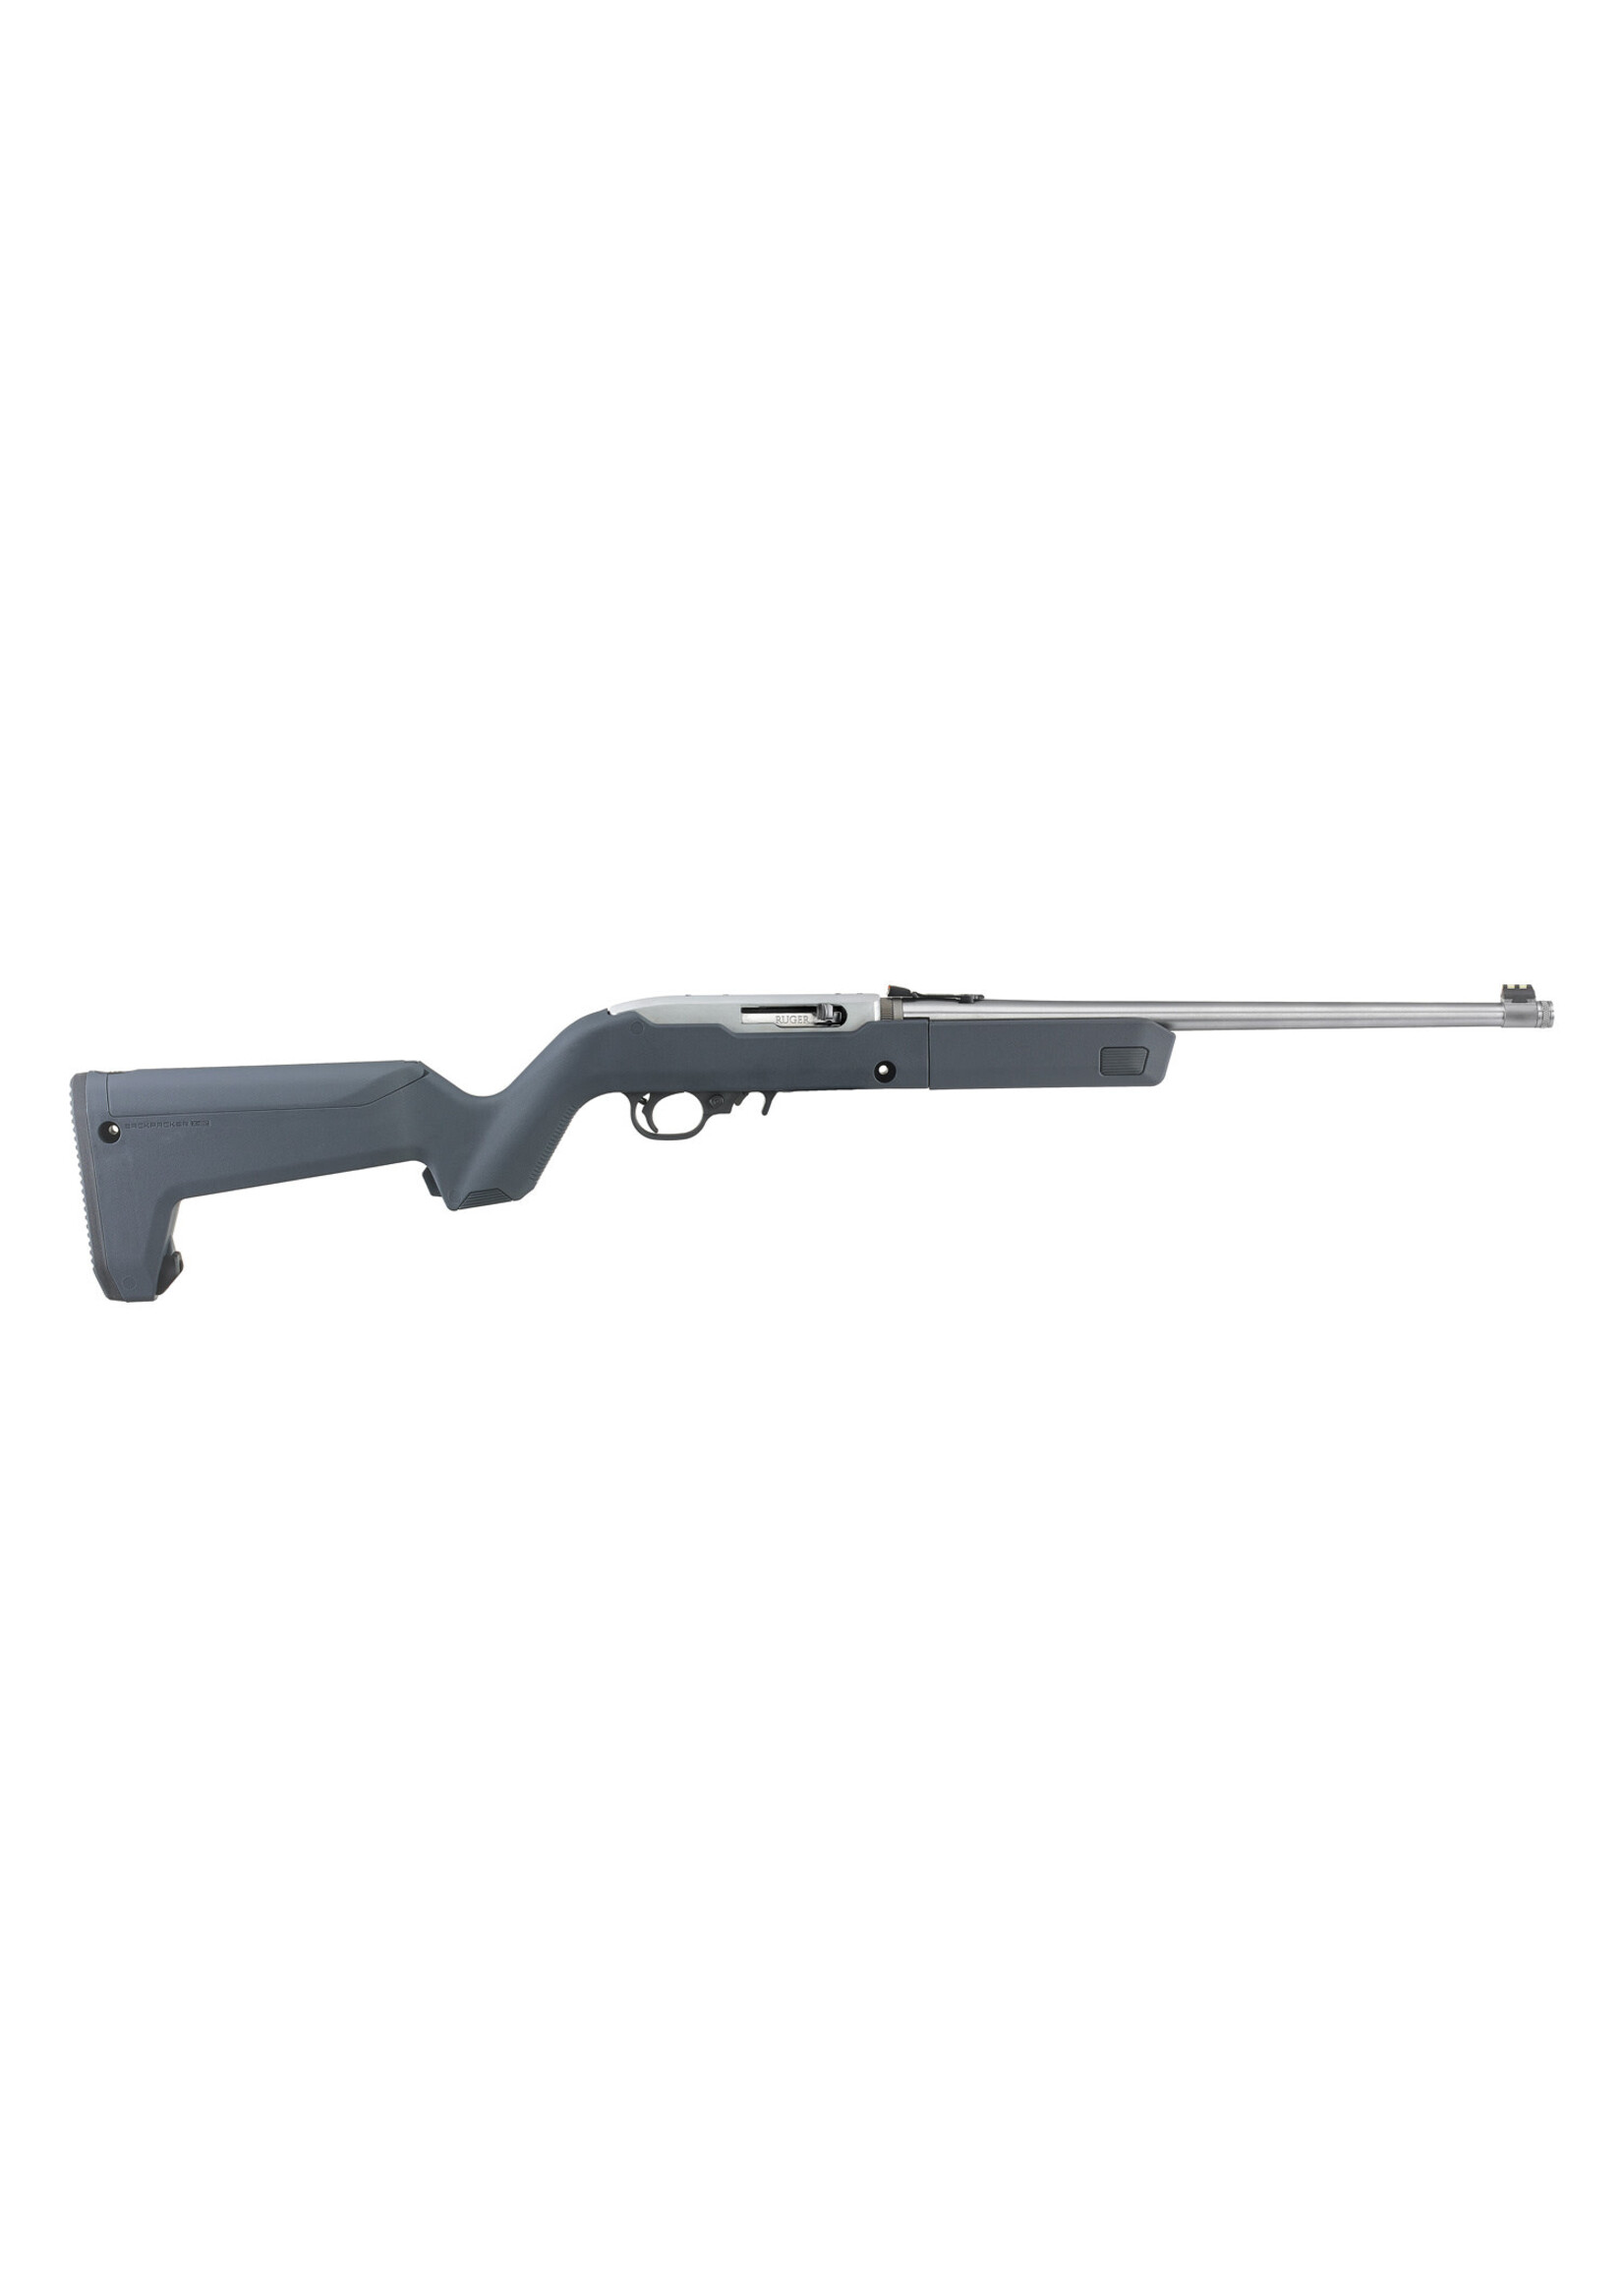 RUGER RUGER 10/22 TAKEDOWN .22LR 10RD 16.4" W/ GRAY MAGPUL X-22 BACKPACKER STOCK